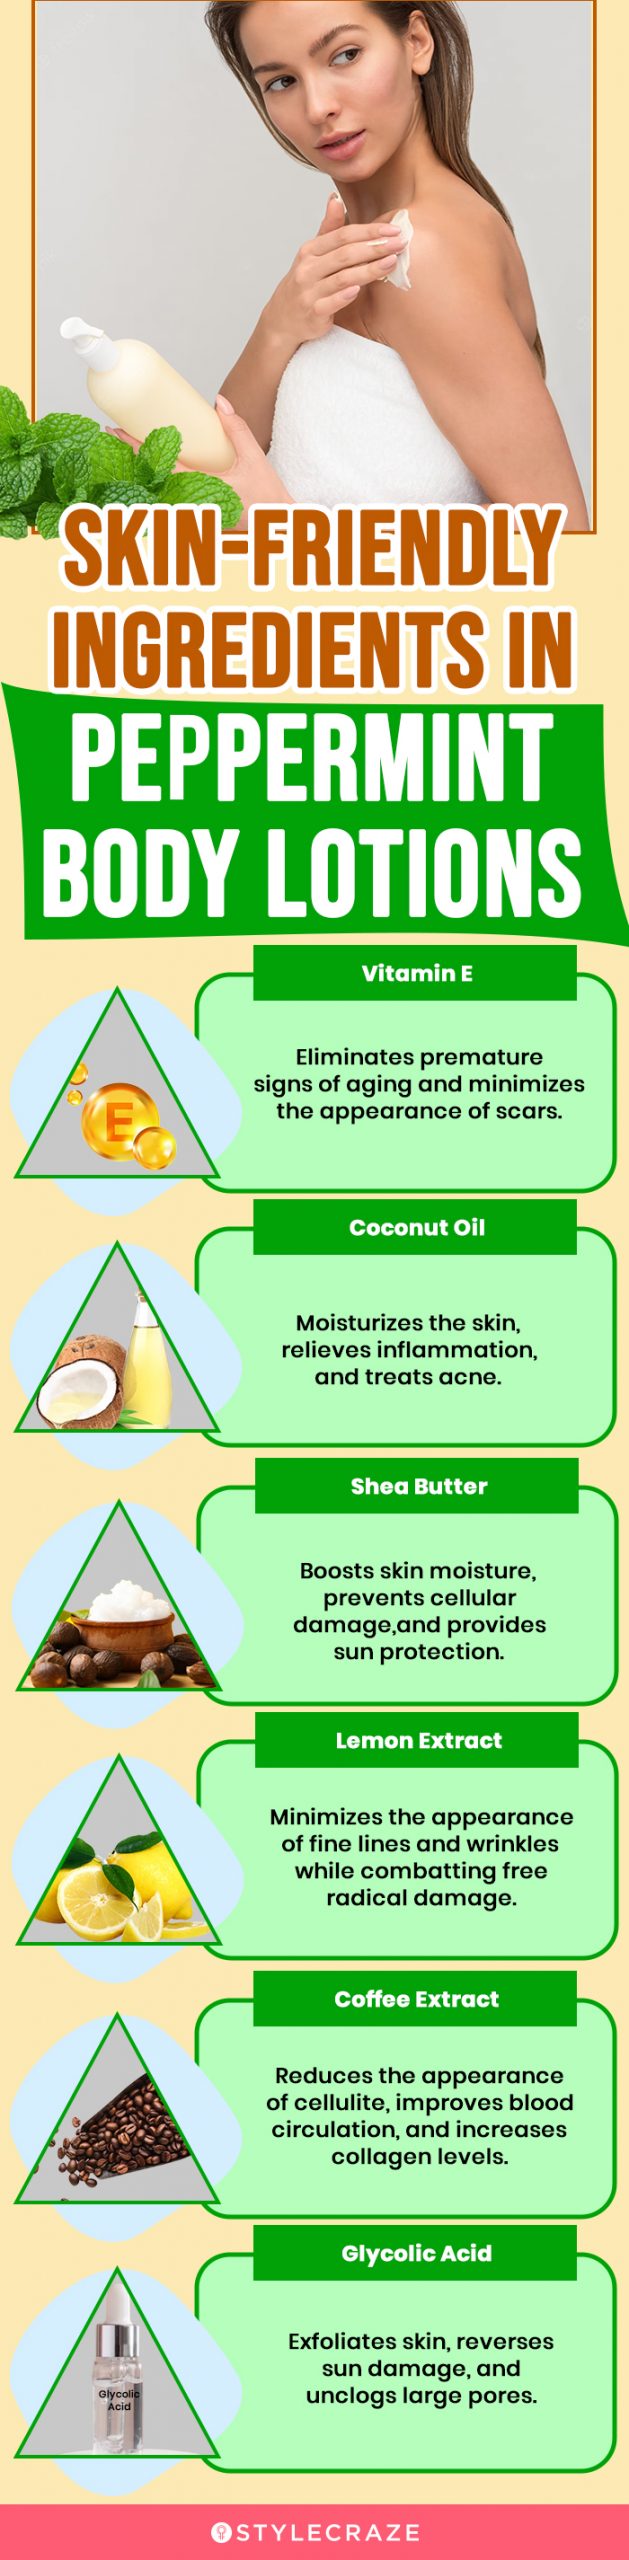 Skin-Friendly Ingredients In Peppermint Body Lotions (infographic)